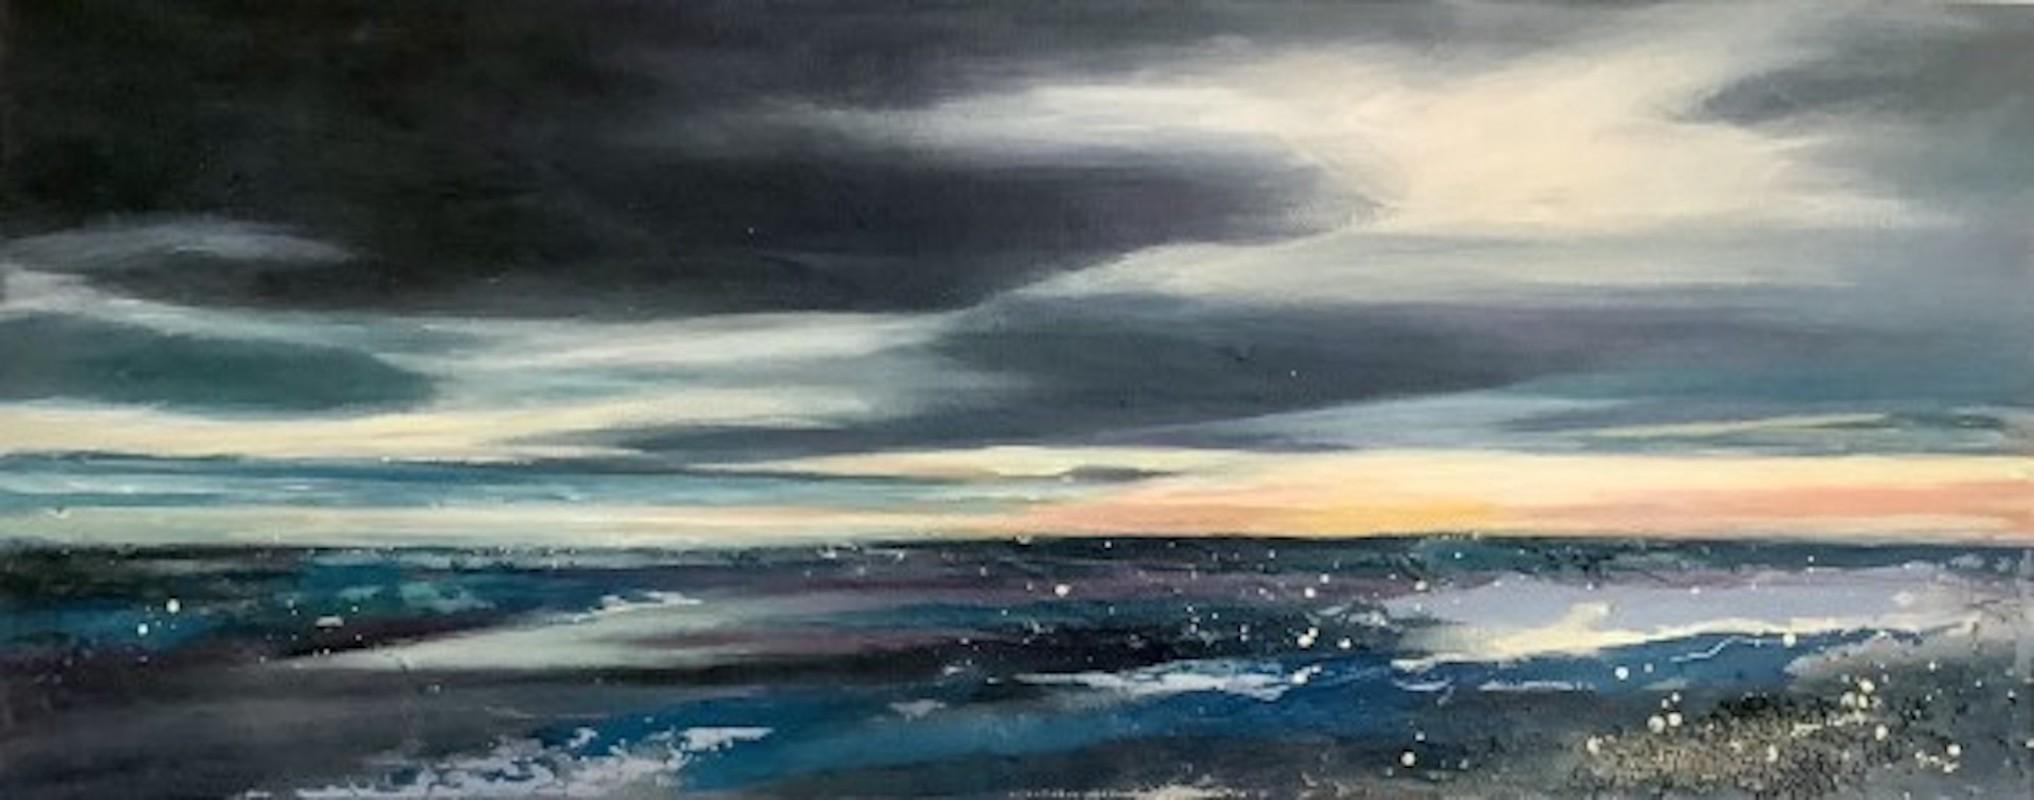 Adele Riley - Adele Riley, The Last Light, Original Seascape Painting,  Affordable Art For Sale at 1stDibs